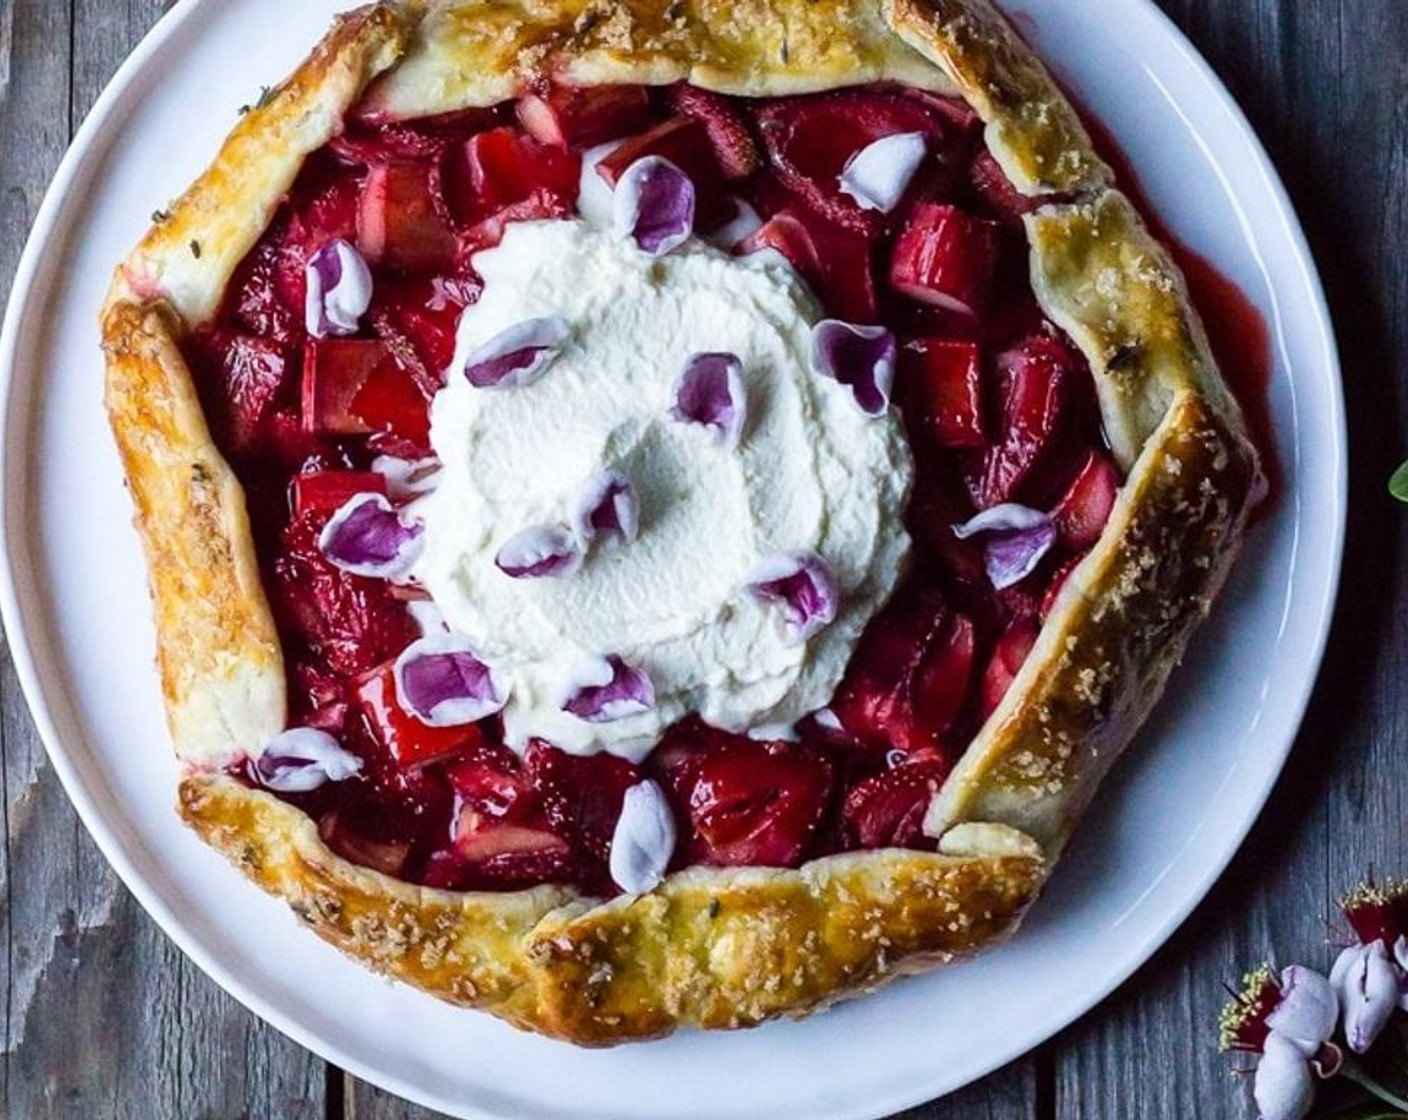 step 12 Serve each slice of cooled galette with a dollop of creme fraiche whipped cream and edible flower blossoms. Enjoy!